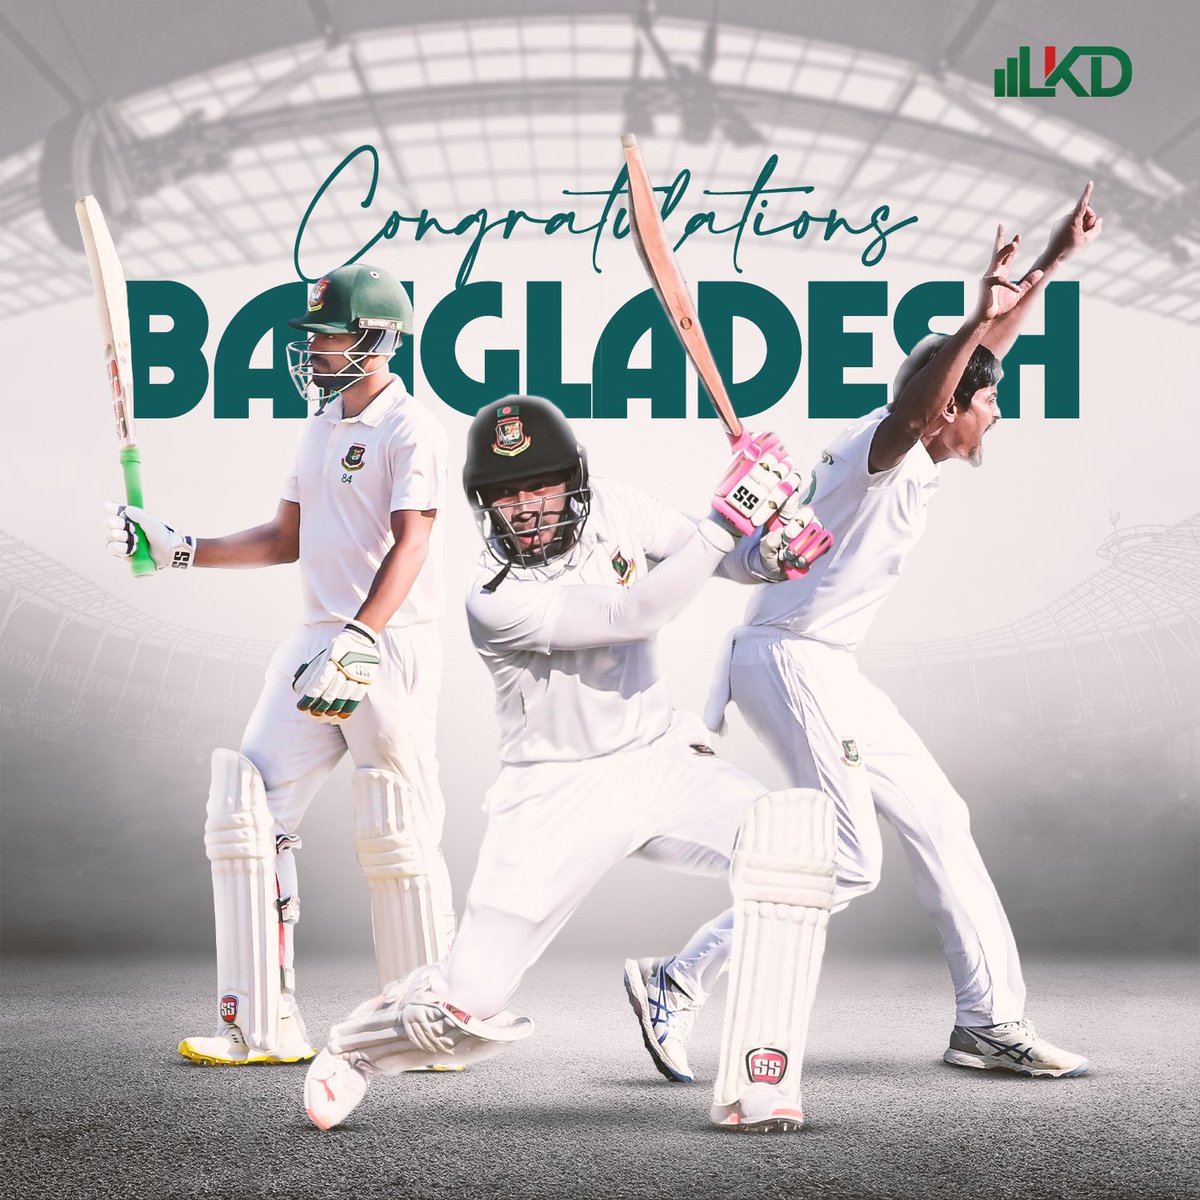 Congratulations to Bangladesh for the first ever Test match win over New Zealand at Home. One match to go boys 👍